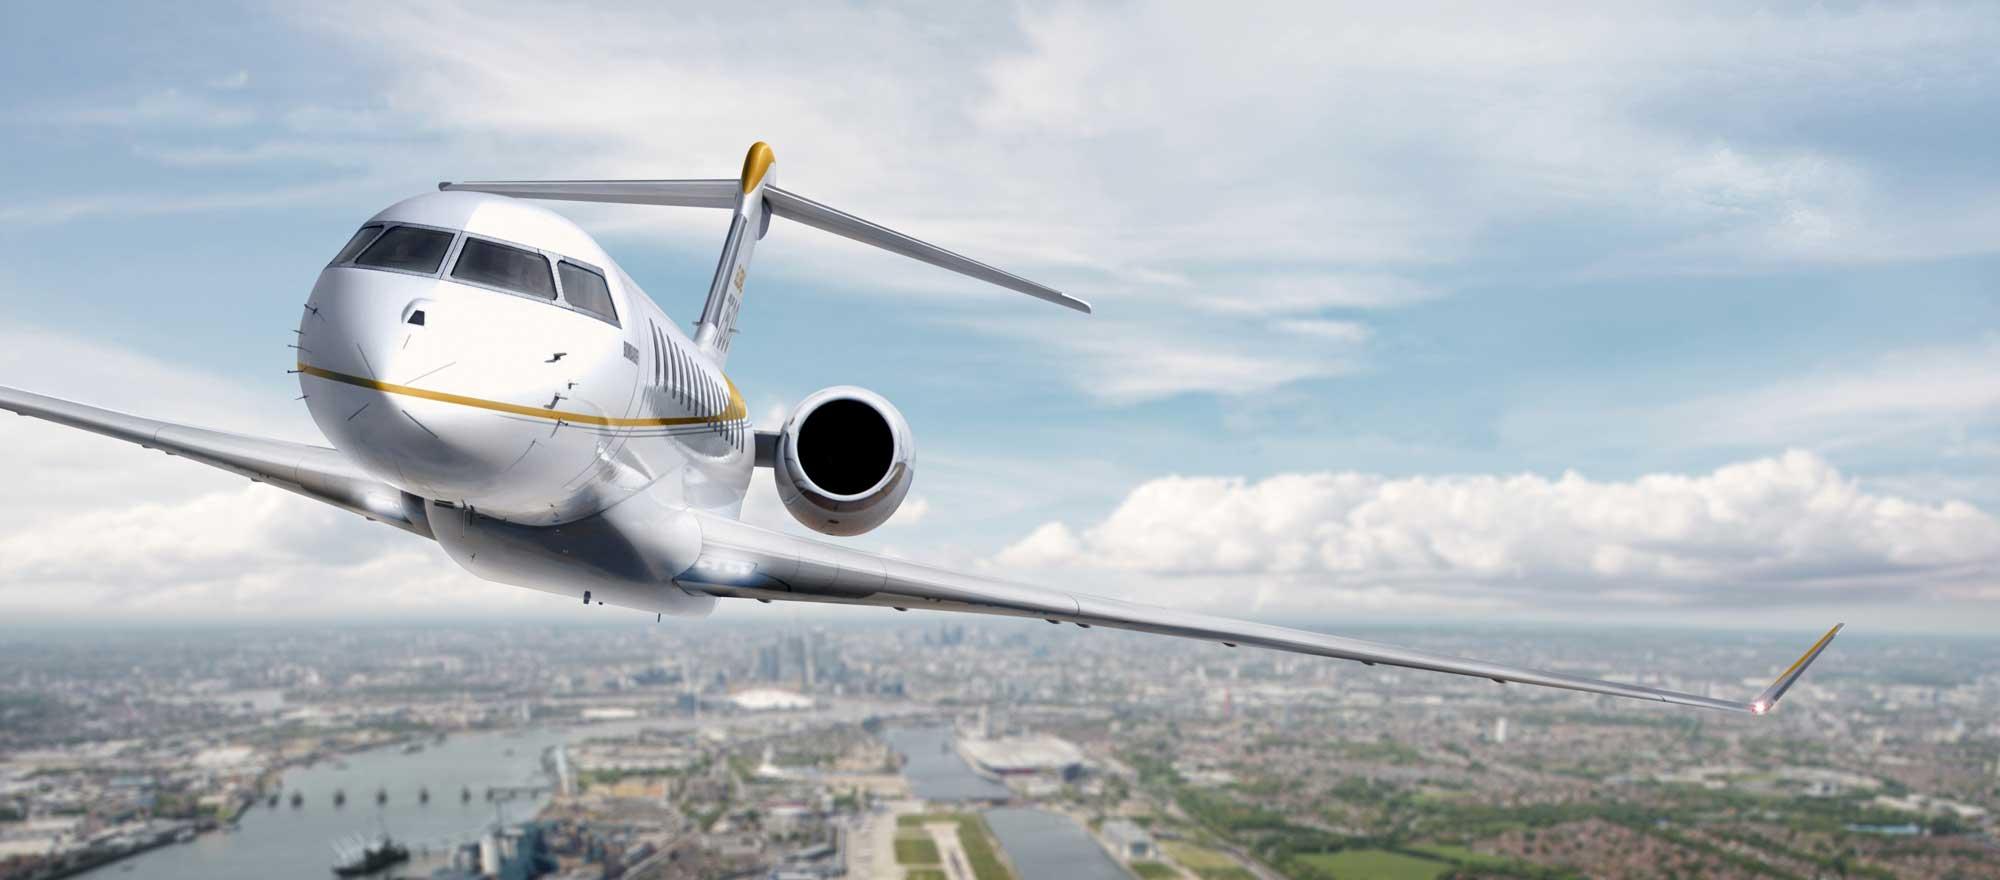 I flew on a $75 million Bombardier Global 7500 private jet from